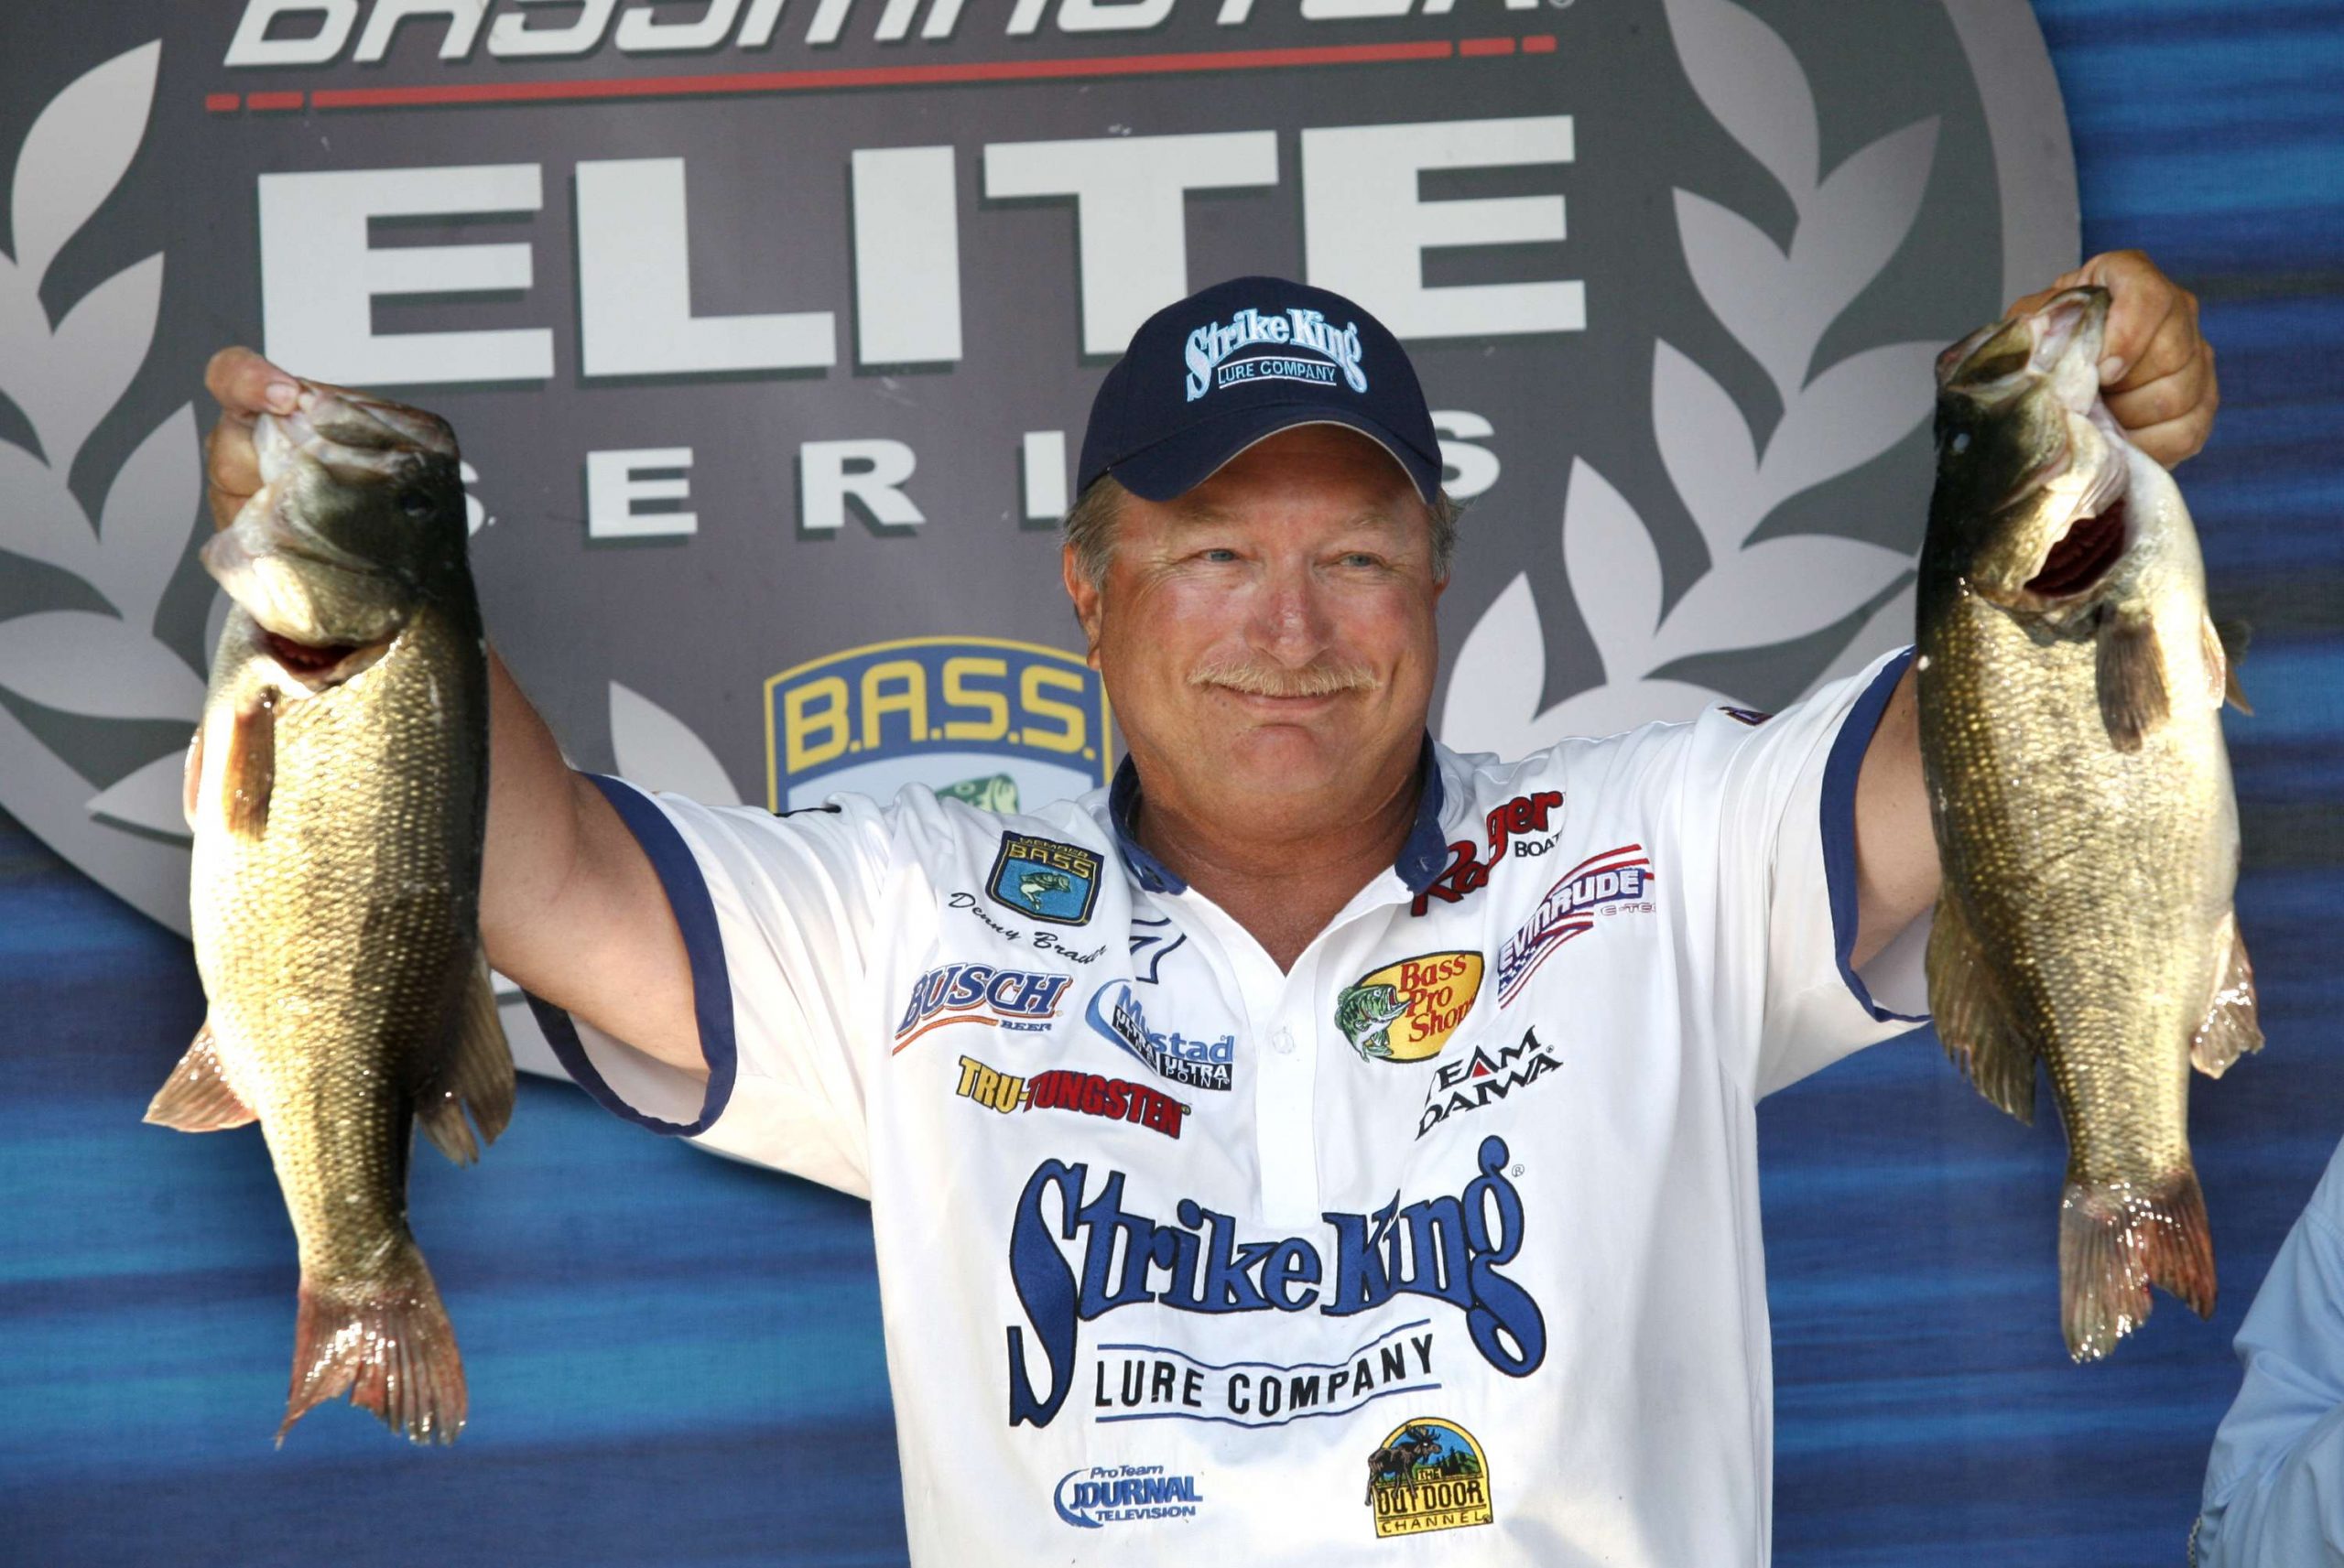 The Elites also visited Lake Champlain in their inaugural season in 2006, with Denny Brauer knocking out a number of milestones during his victory. Rookie Chris Lane led going into the final day but Brauer blew him and the field away by 8 pounds.